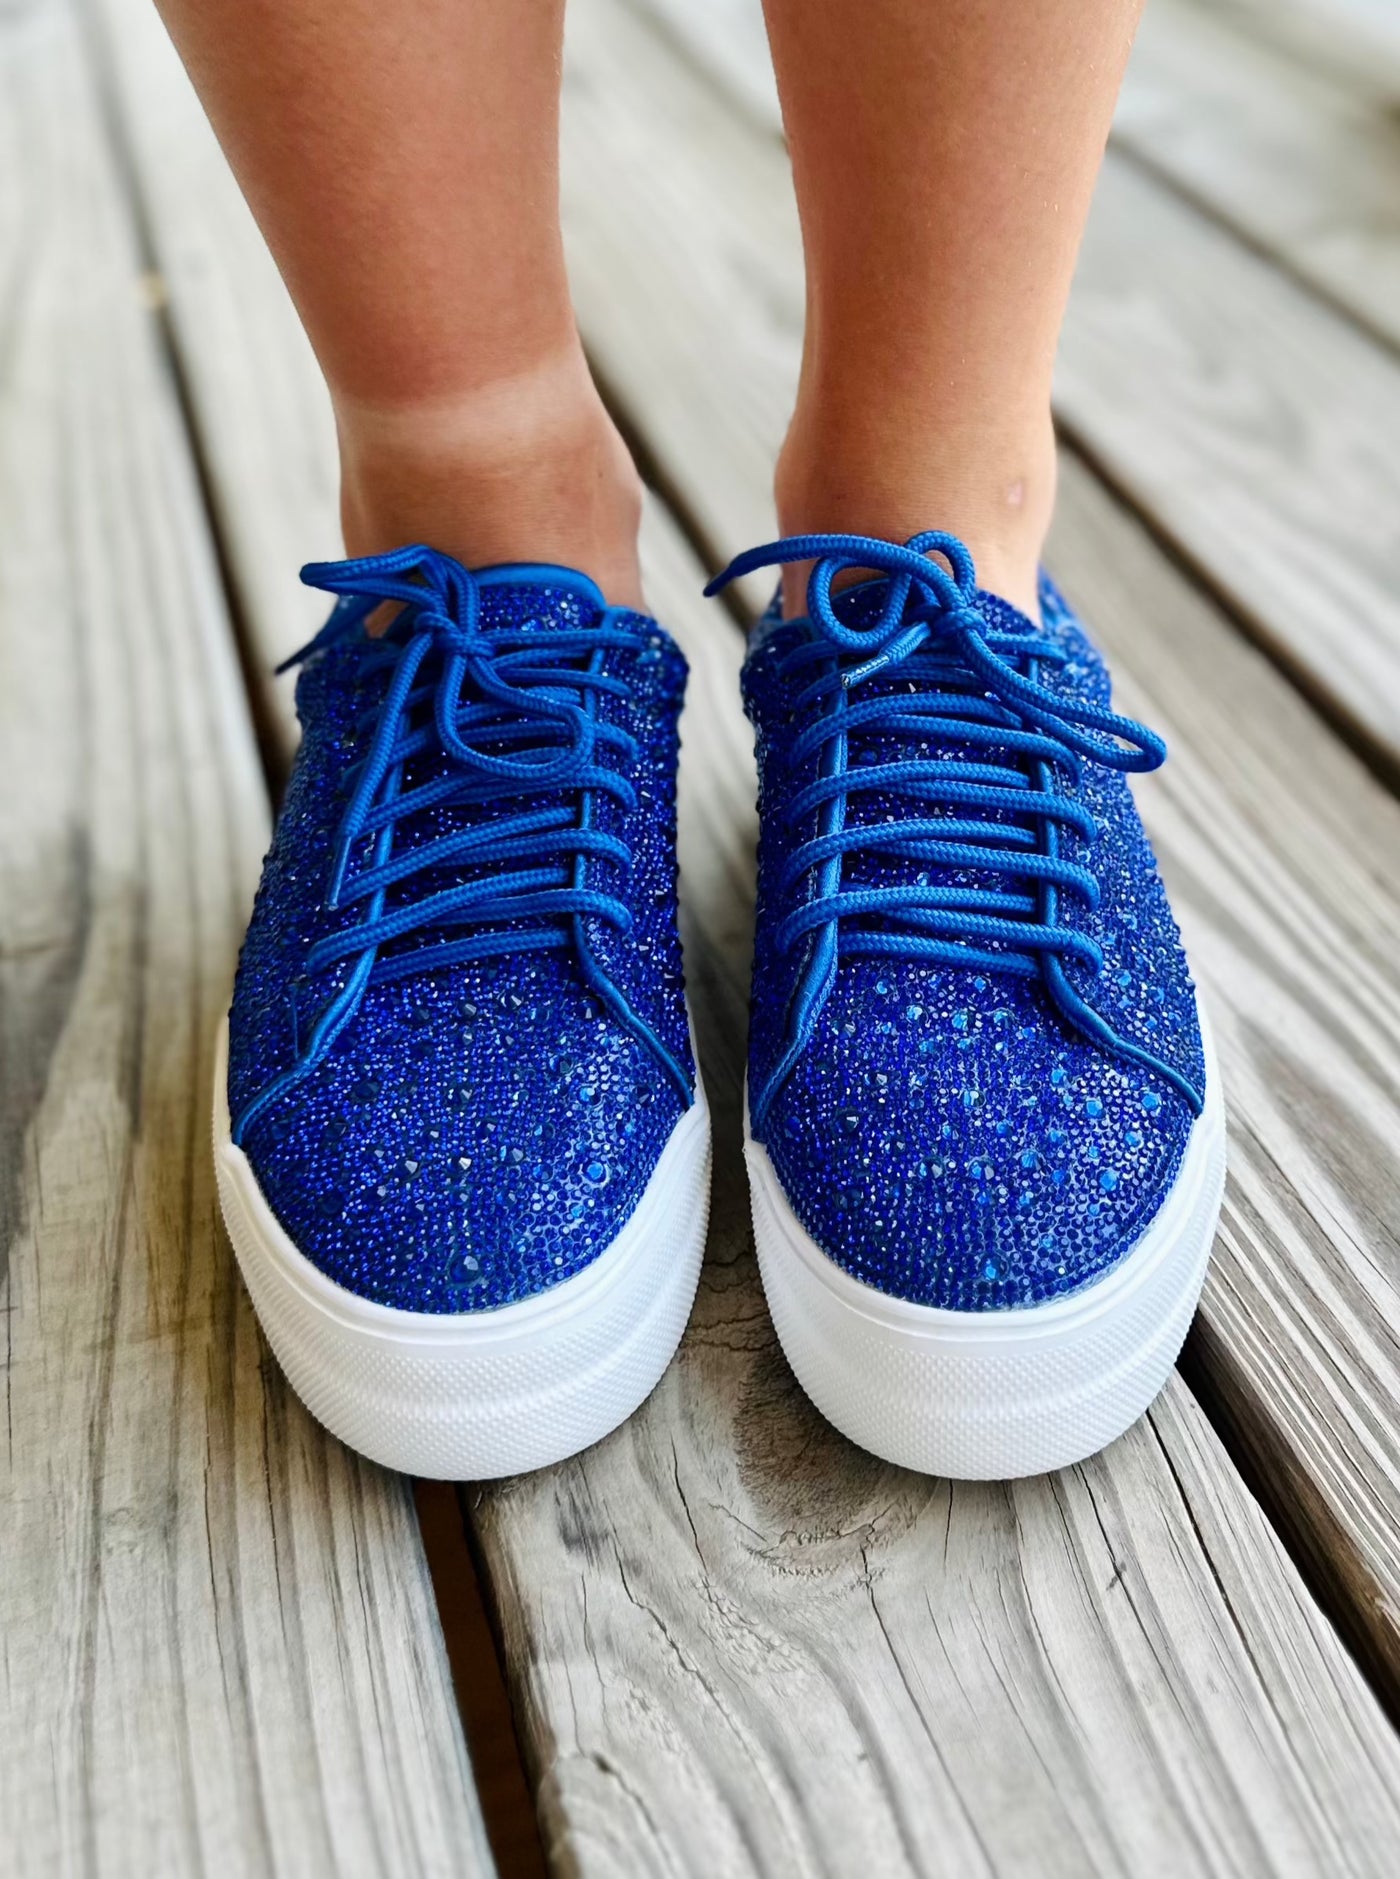 Corkys "Bedazzle" Sneakers in Royal Blue